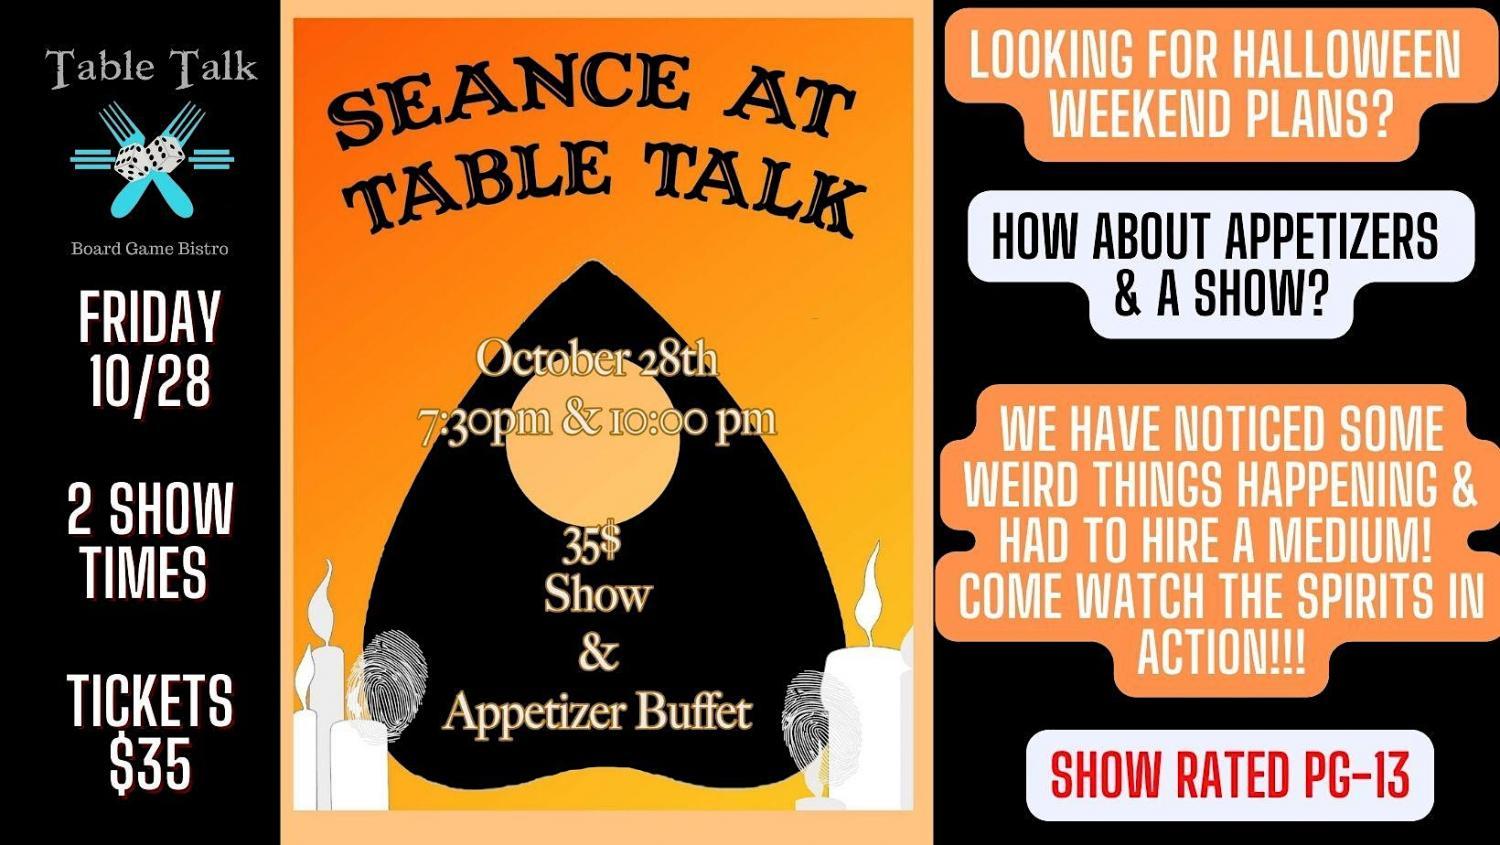 Seance at Table Talk -Late Show
Fri Oct 28, 7:00 PM - Sat Oct 29, 7:00 PM
in 8 days